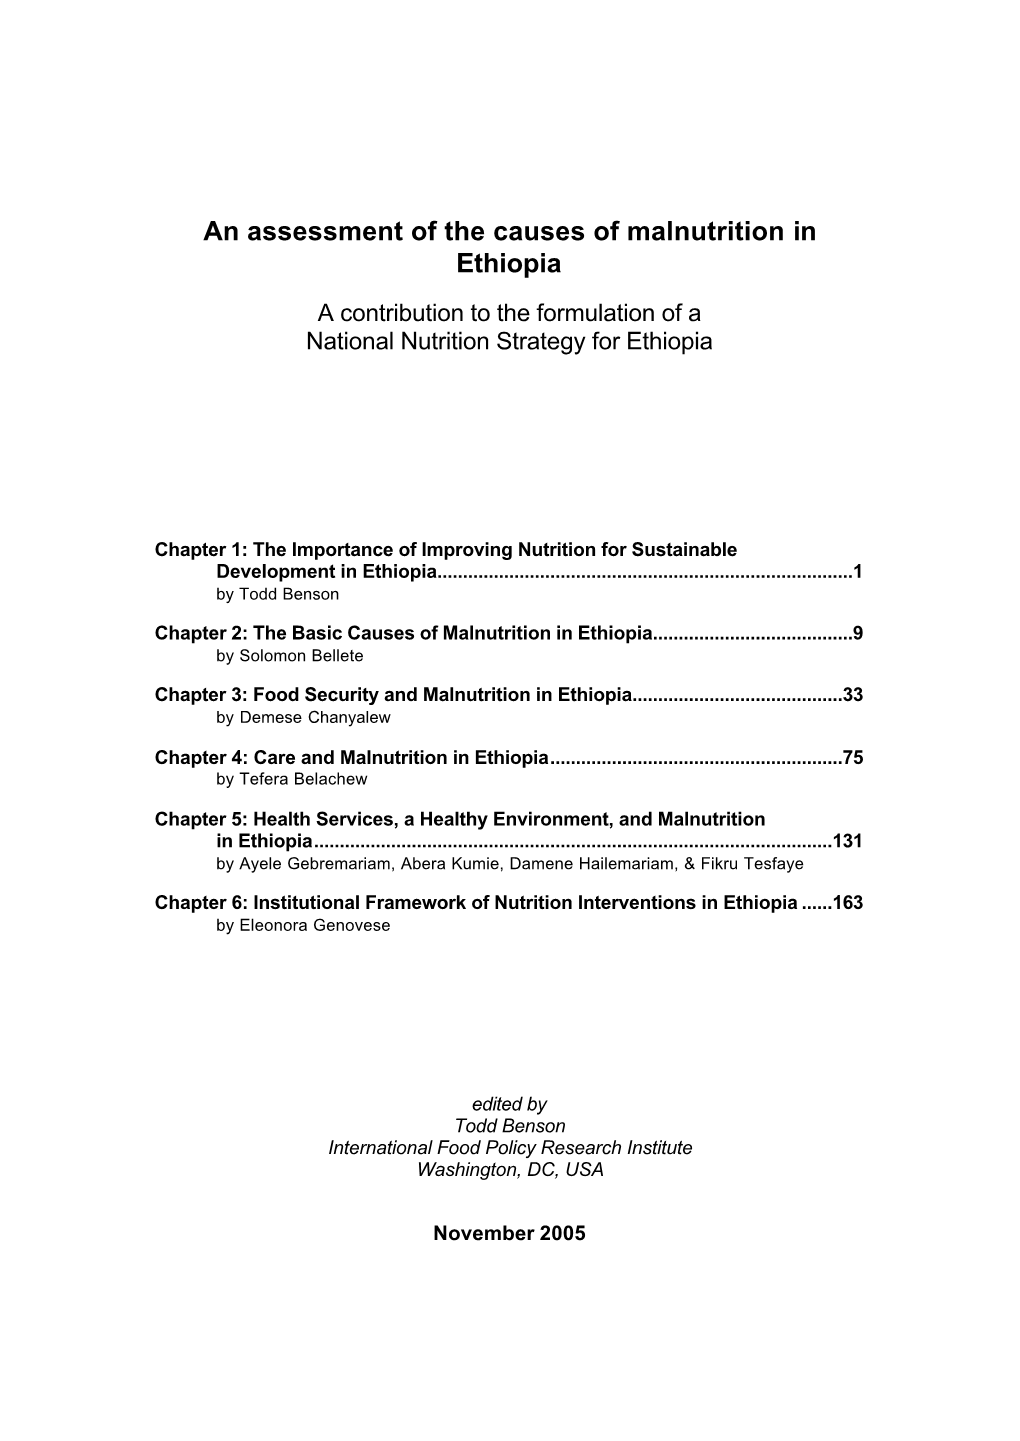 An Assessment of the Causes of Malnutrition in Ethiopia a Contribution to the Formulation of a National Nutrition Strategy for Ethiopia